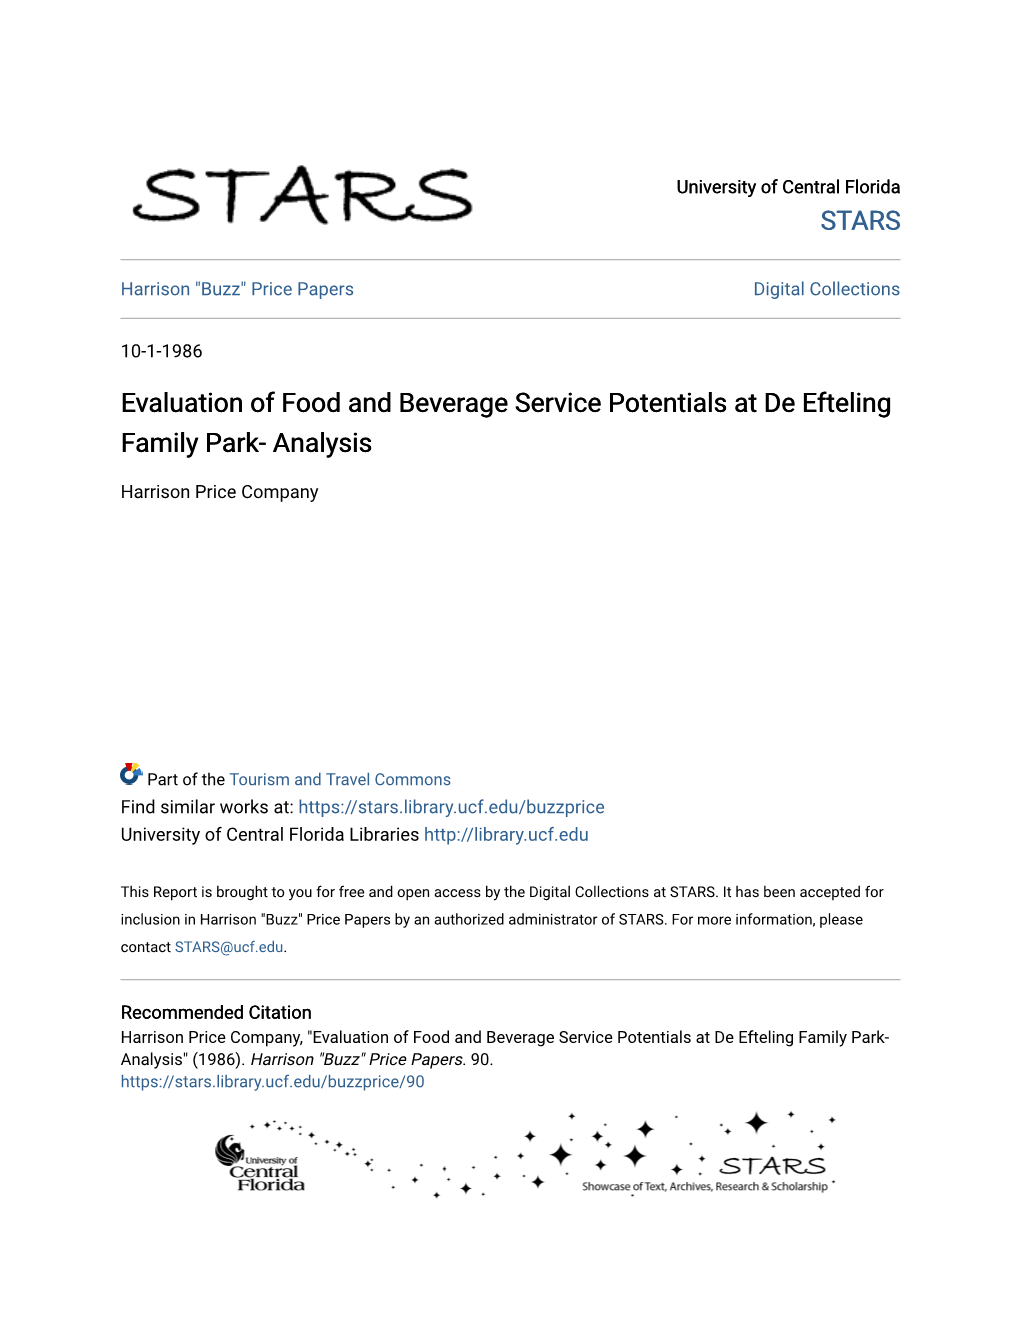 Evaluation of Food and Beverage Service Potentials at De Efteling Family Park- Analysis